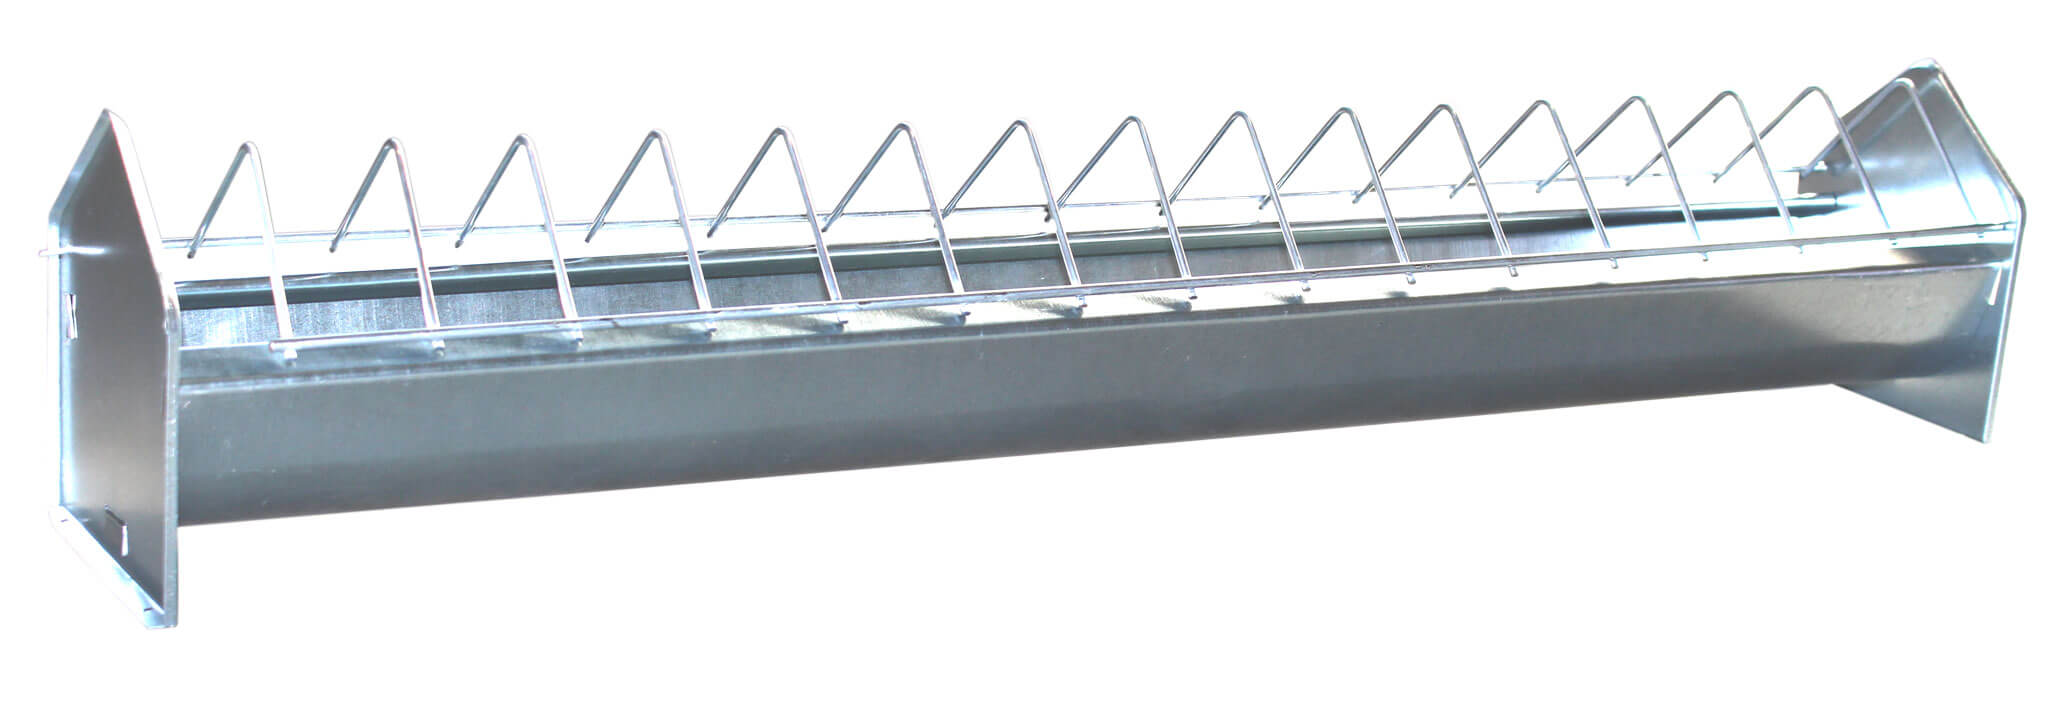 Pullet-Troughs with Feeding Fence, galvanised metal (50cm - 75cm - 100cm)